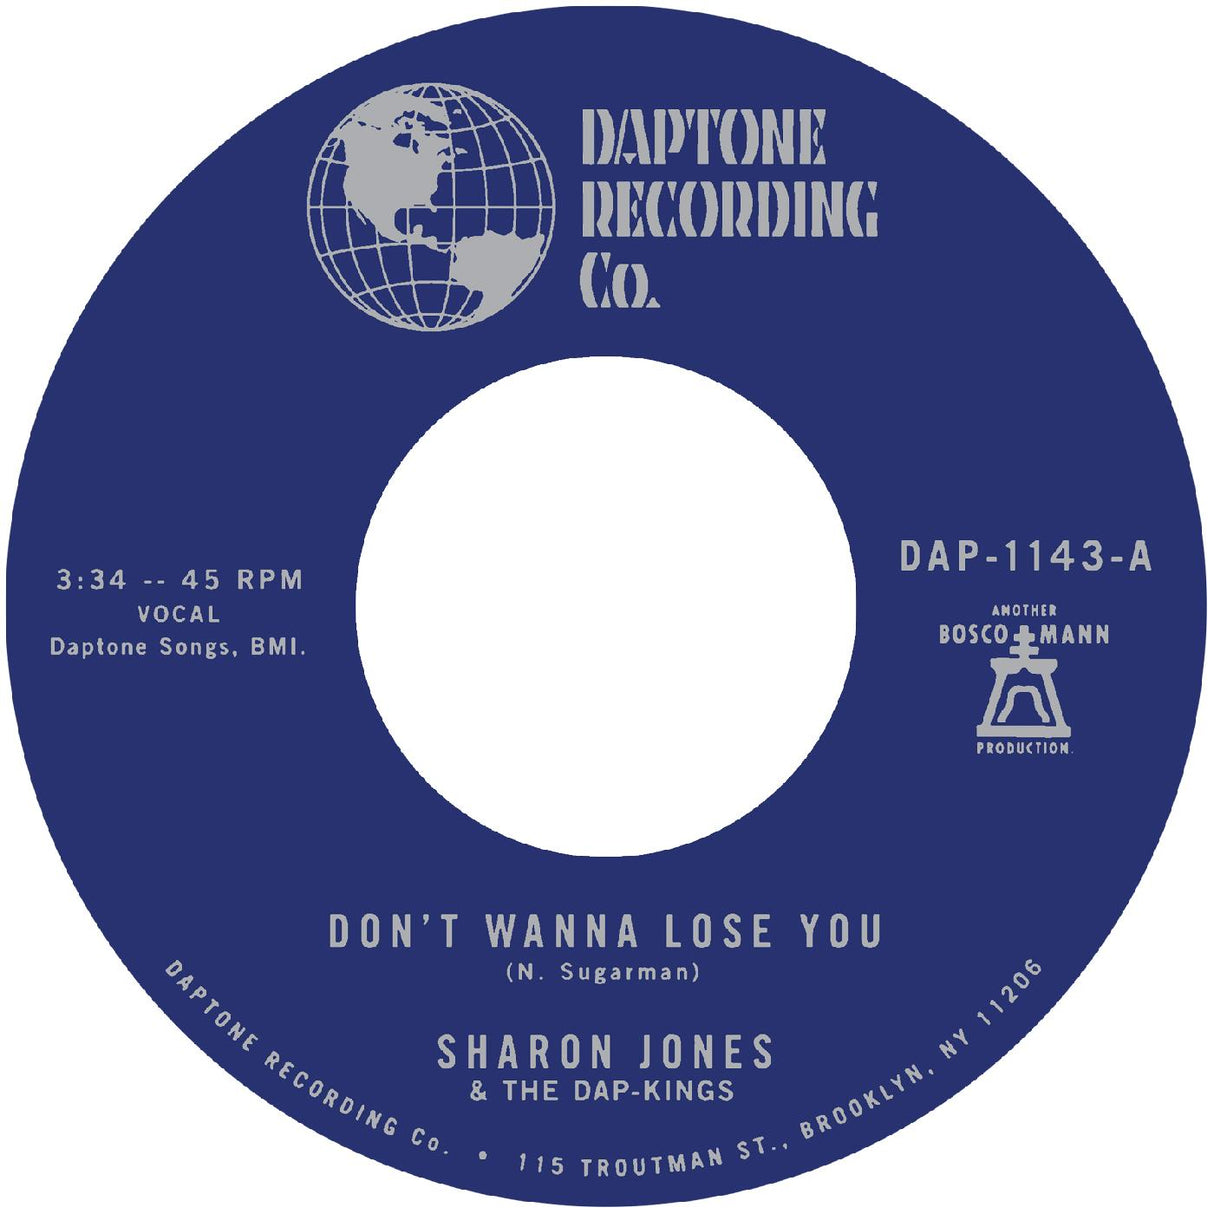 Sharon Jones & The Dap-Kings Don't Want To Lose You b/w Don't Give a Friend a Number Vinyl